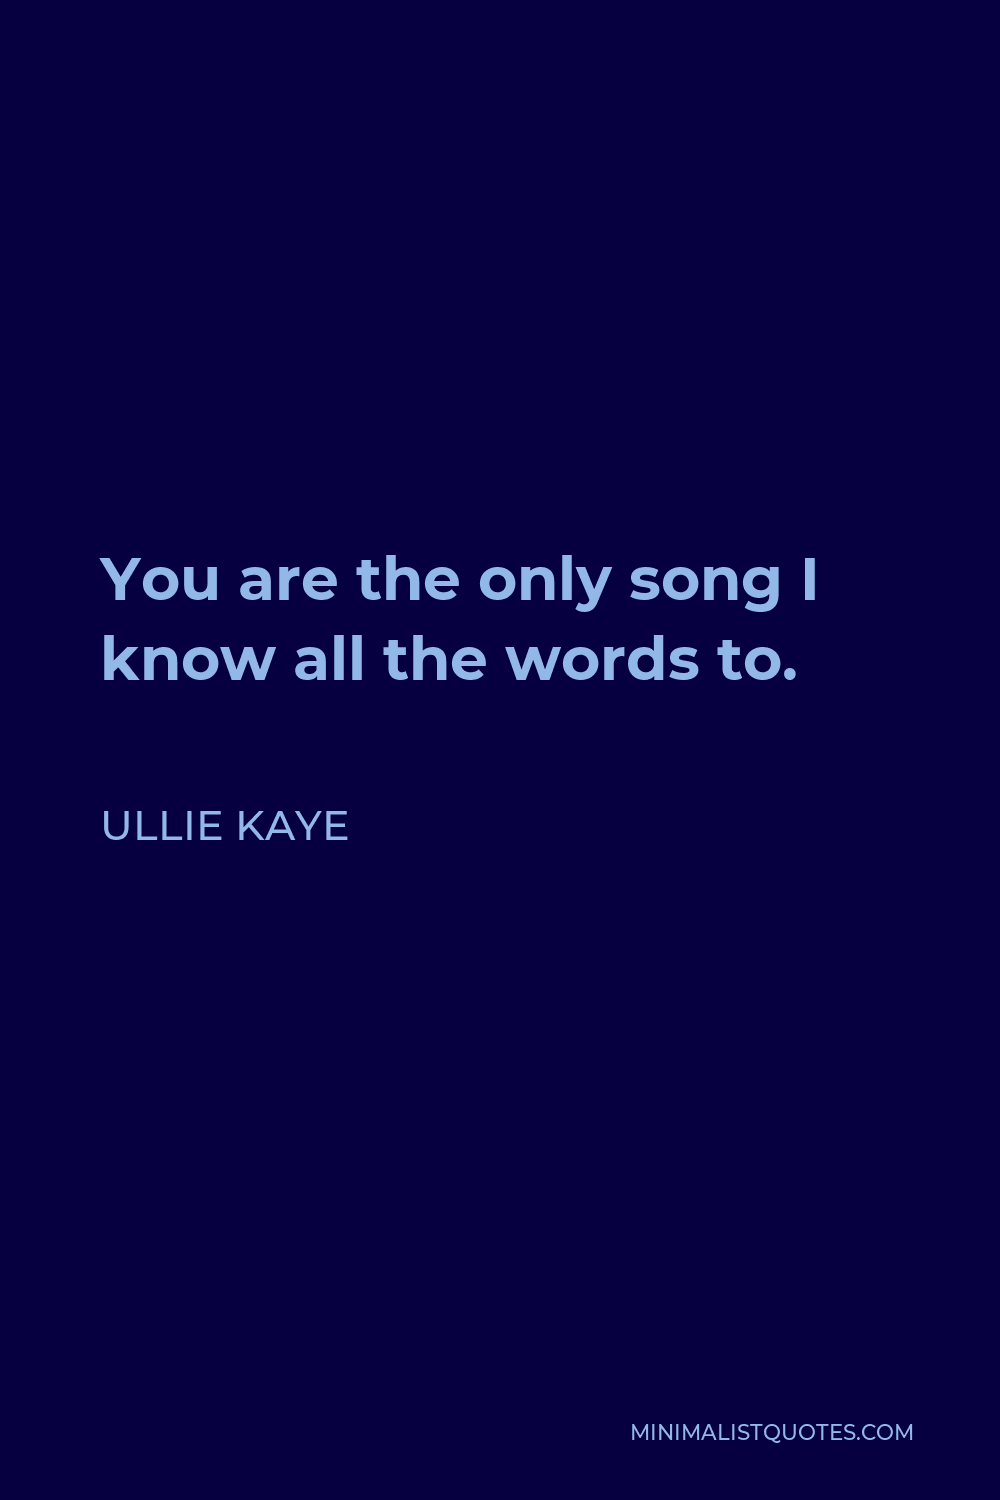 Ullie Kaye Quote - You are the only song I know all the words to.